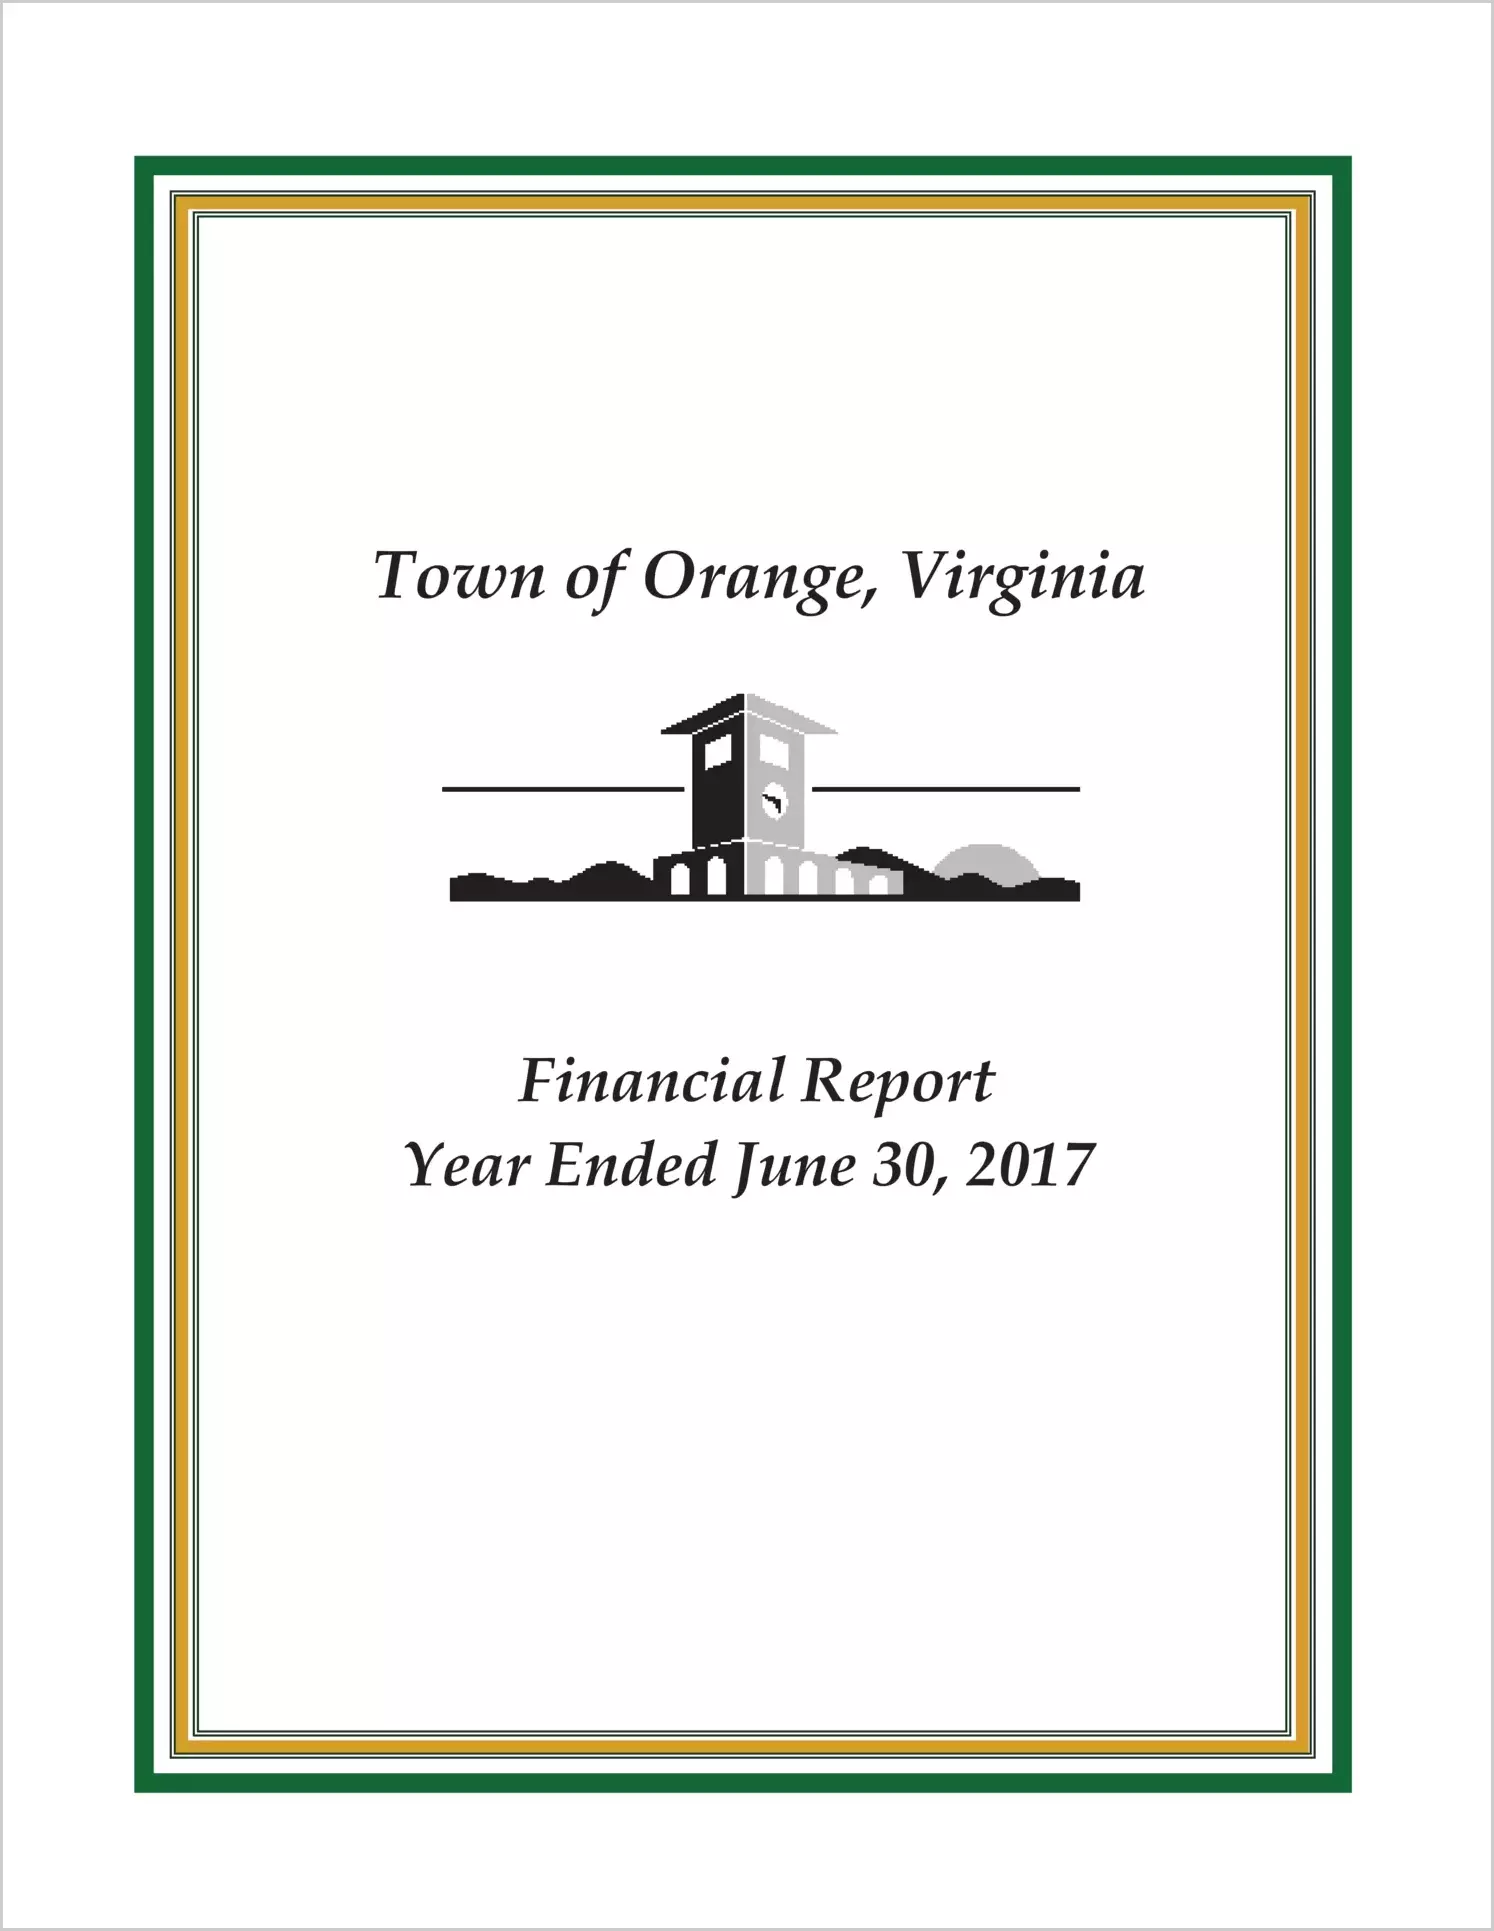 2017 Annual Financial Report for Town of Orange